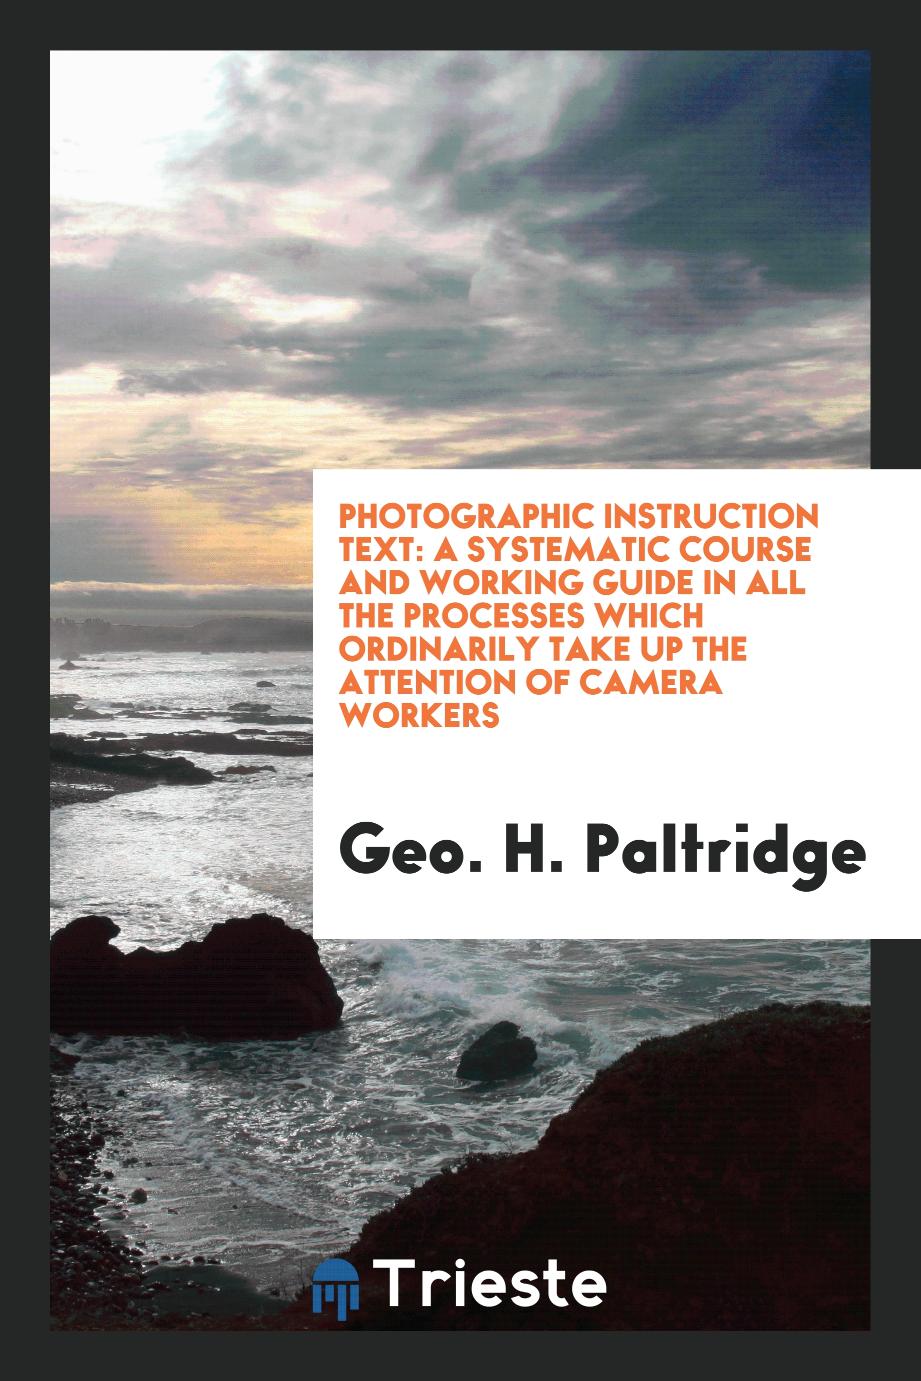 Photographic instruction text: a systematic course and working guide in all the processes which ordinarily take up the attention of camera workers